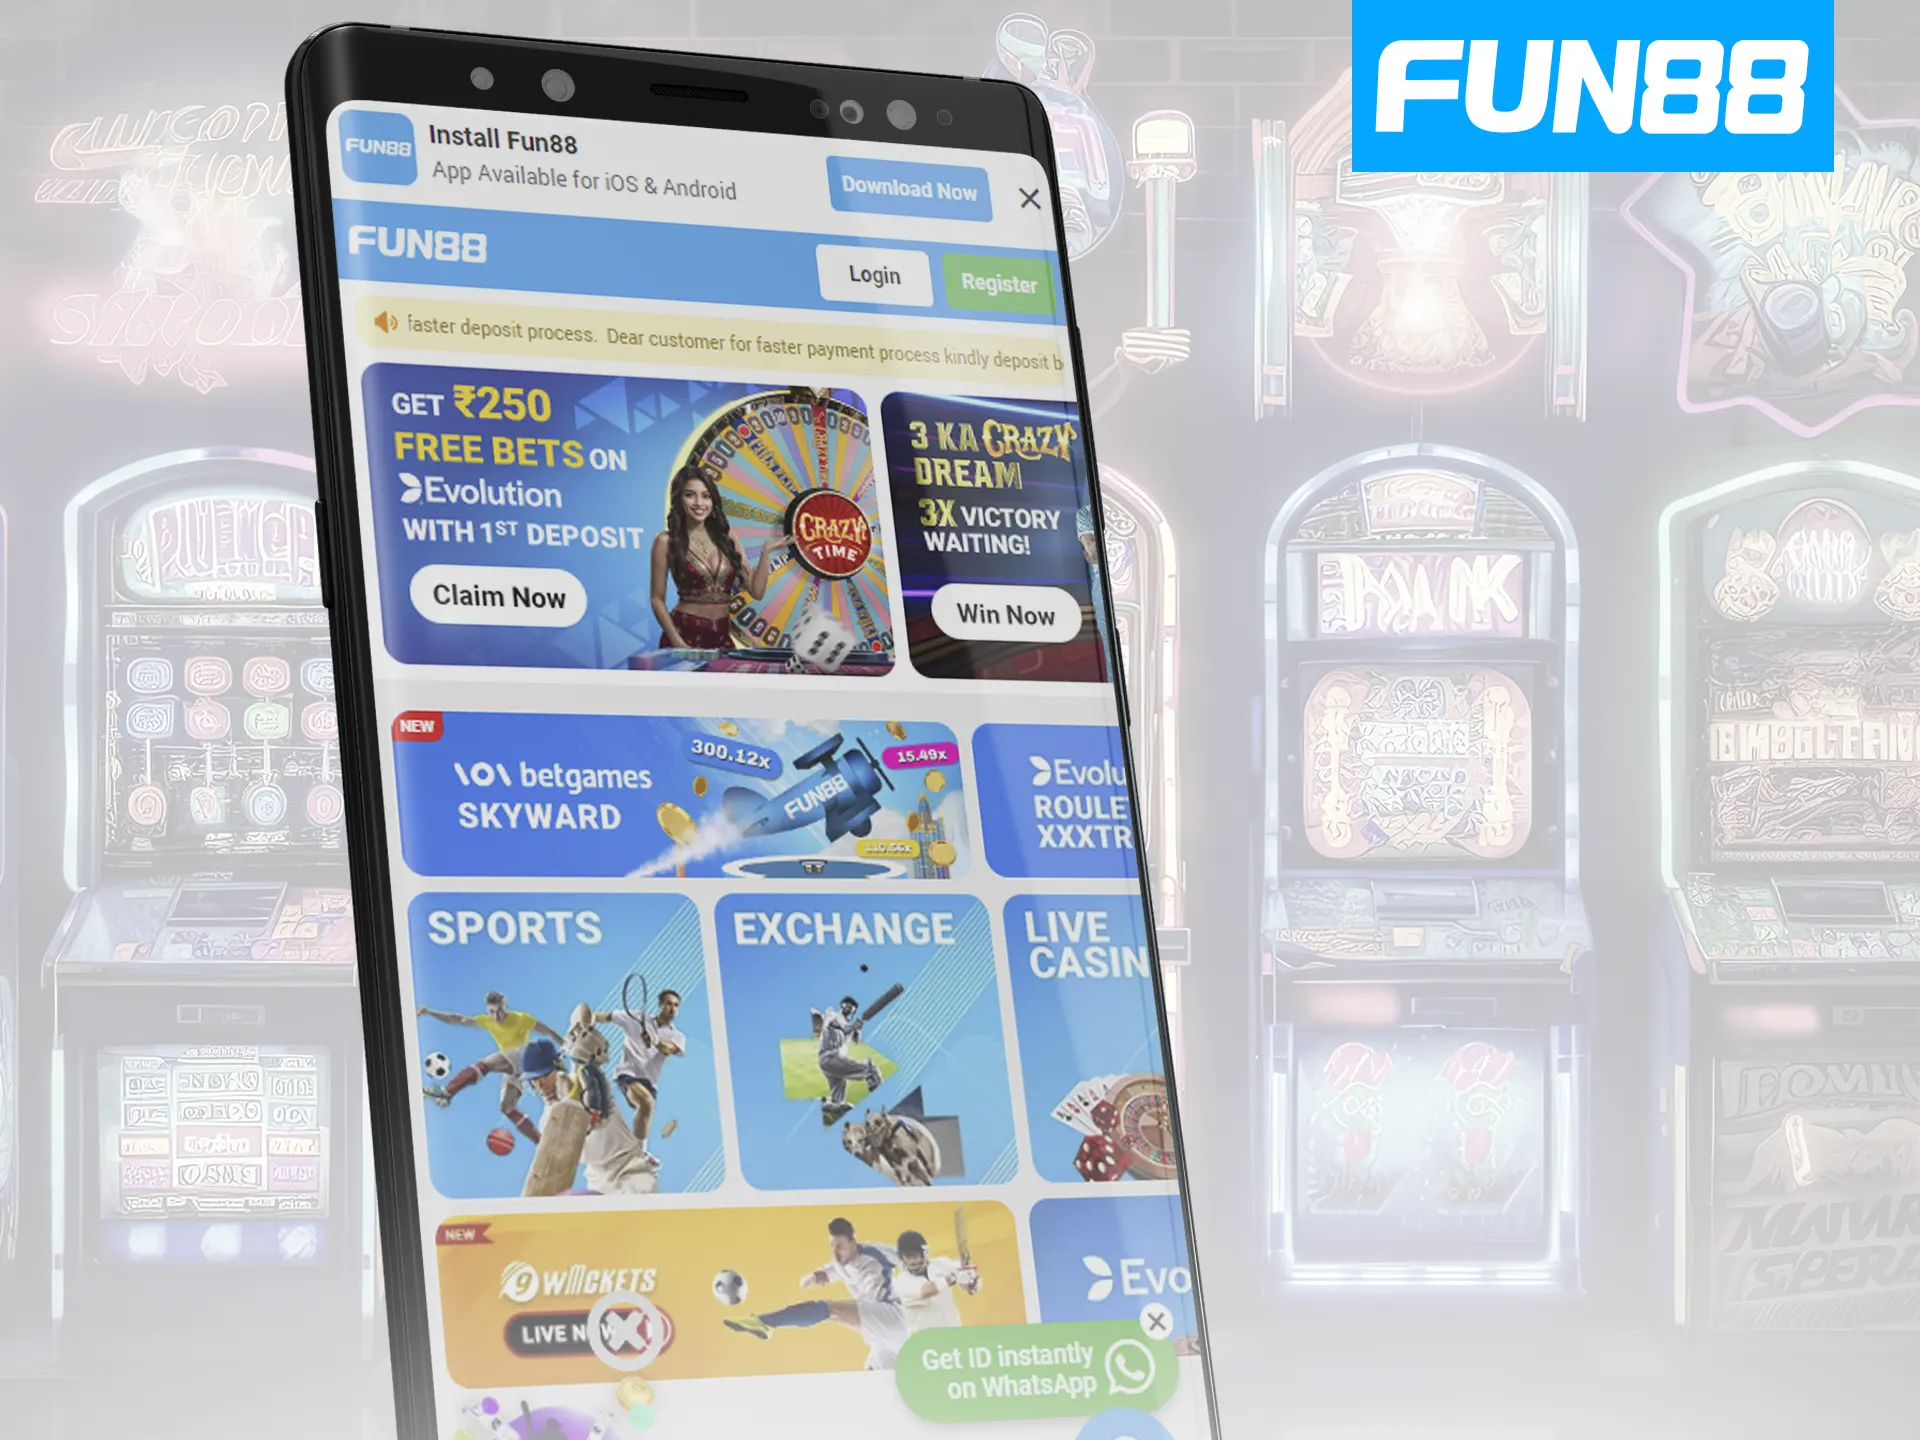 Use the Fun88 mobile website for convenient betting without prior installation on devices.